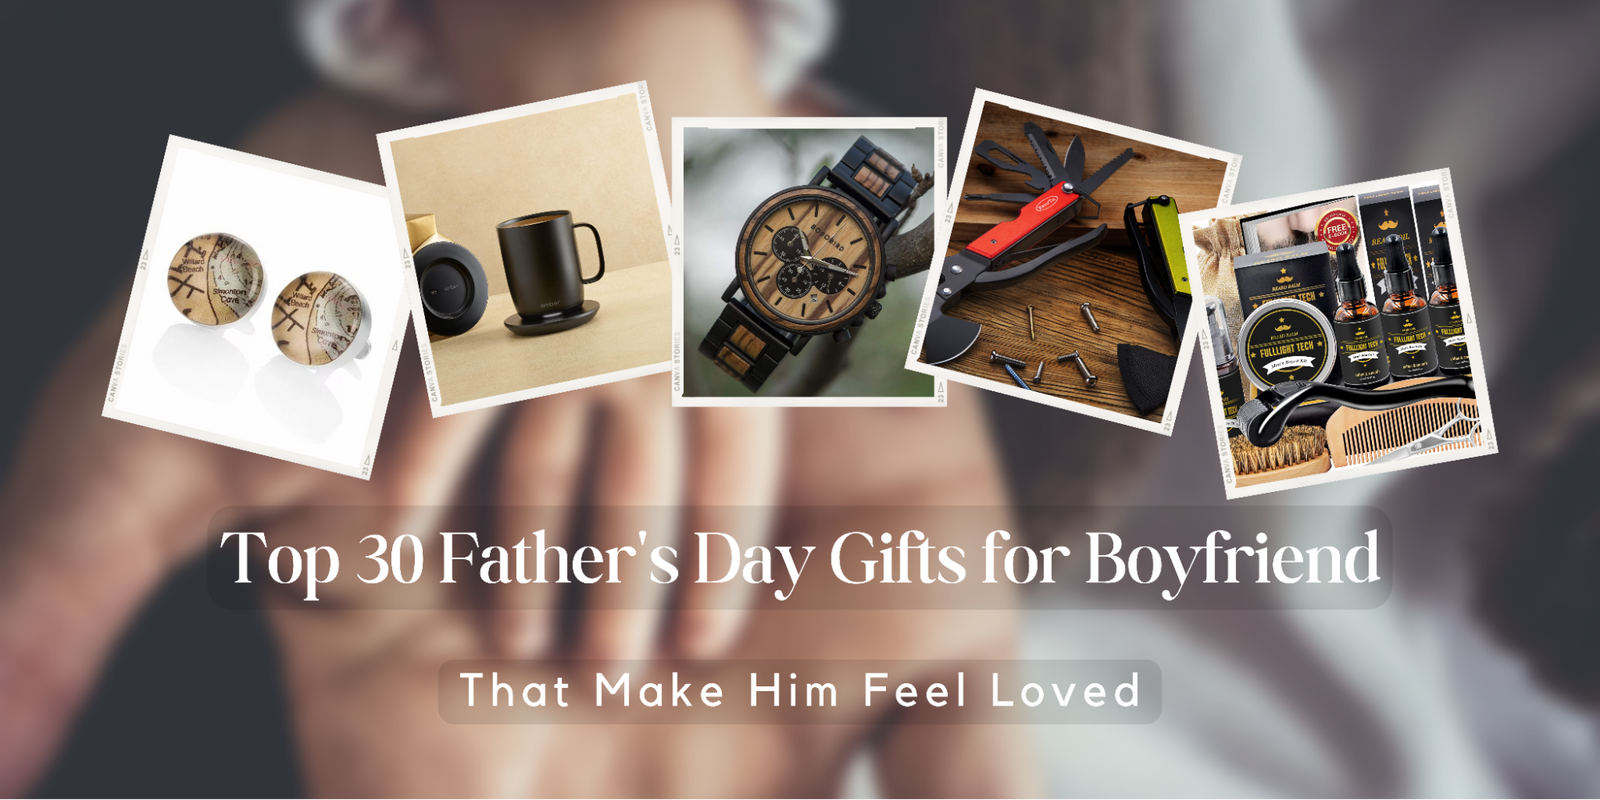 27 Future Husband Gifts for Your Groom on the Wedding Day